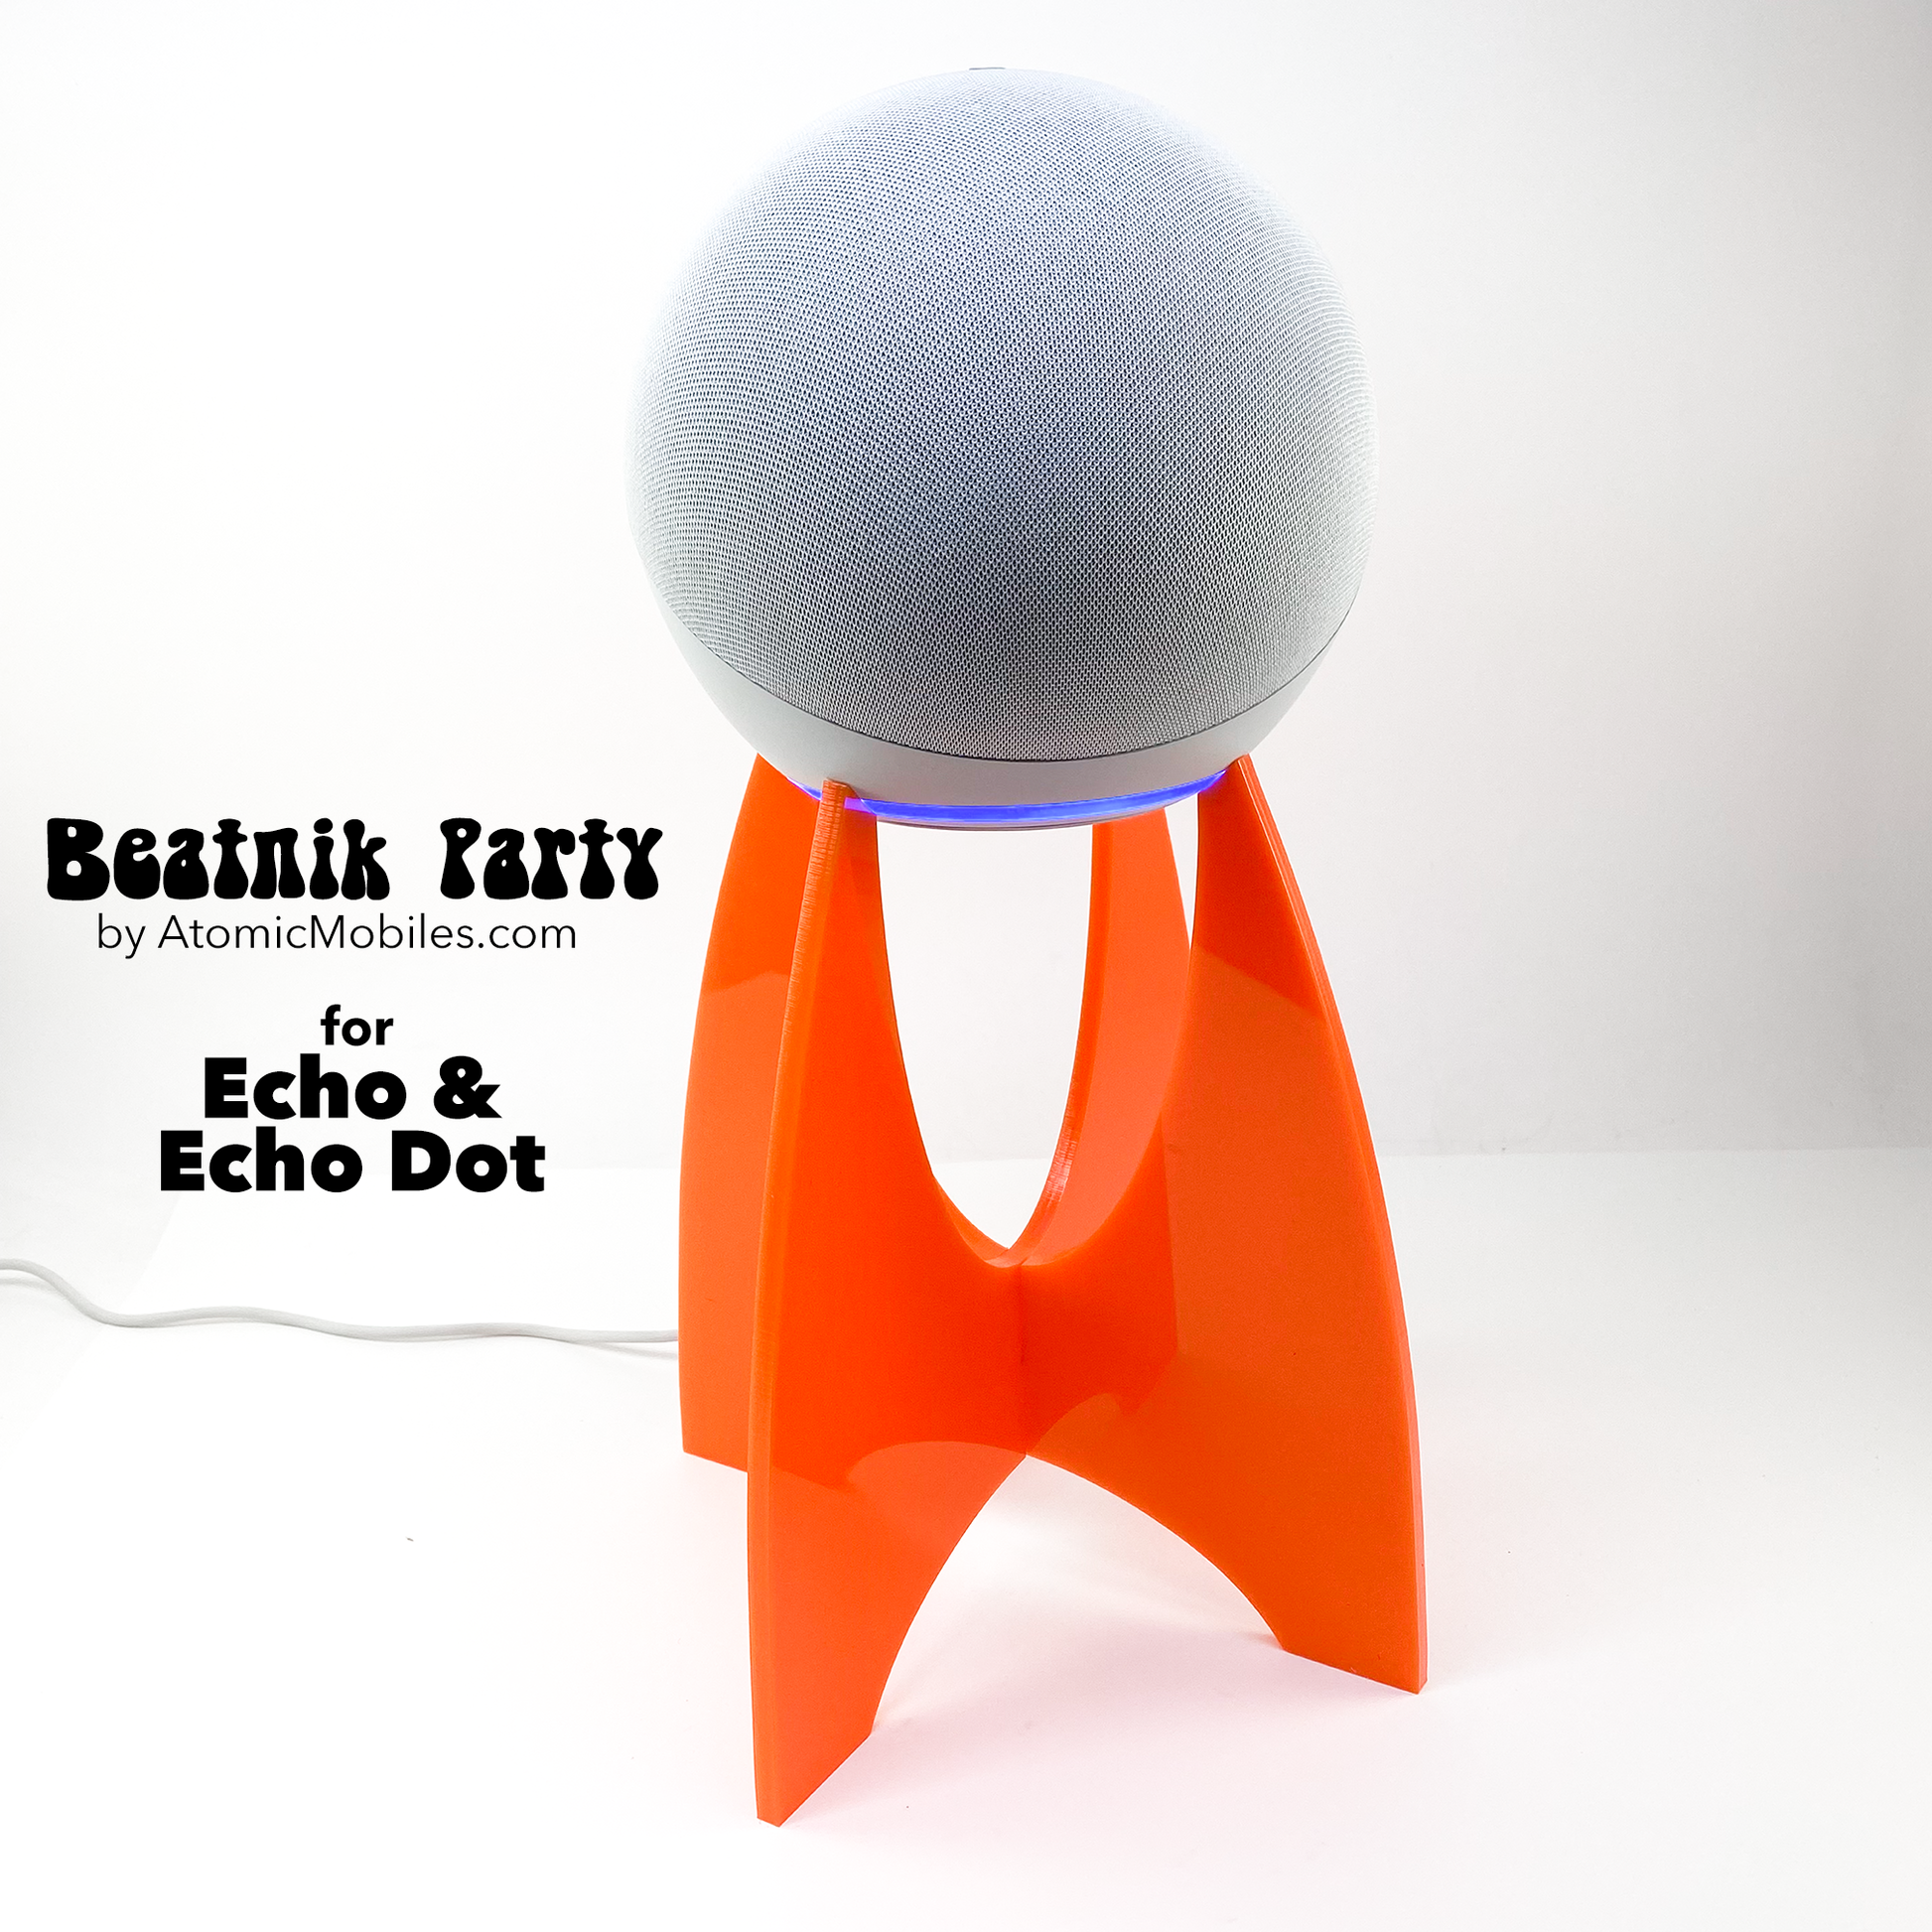 Beatnik Party Amazon Echo Stand for 4th and 5th Gen Echo - orange stand shown - by AtomicMobiles.com